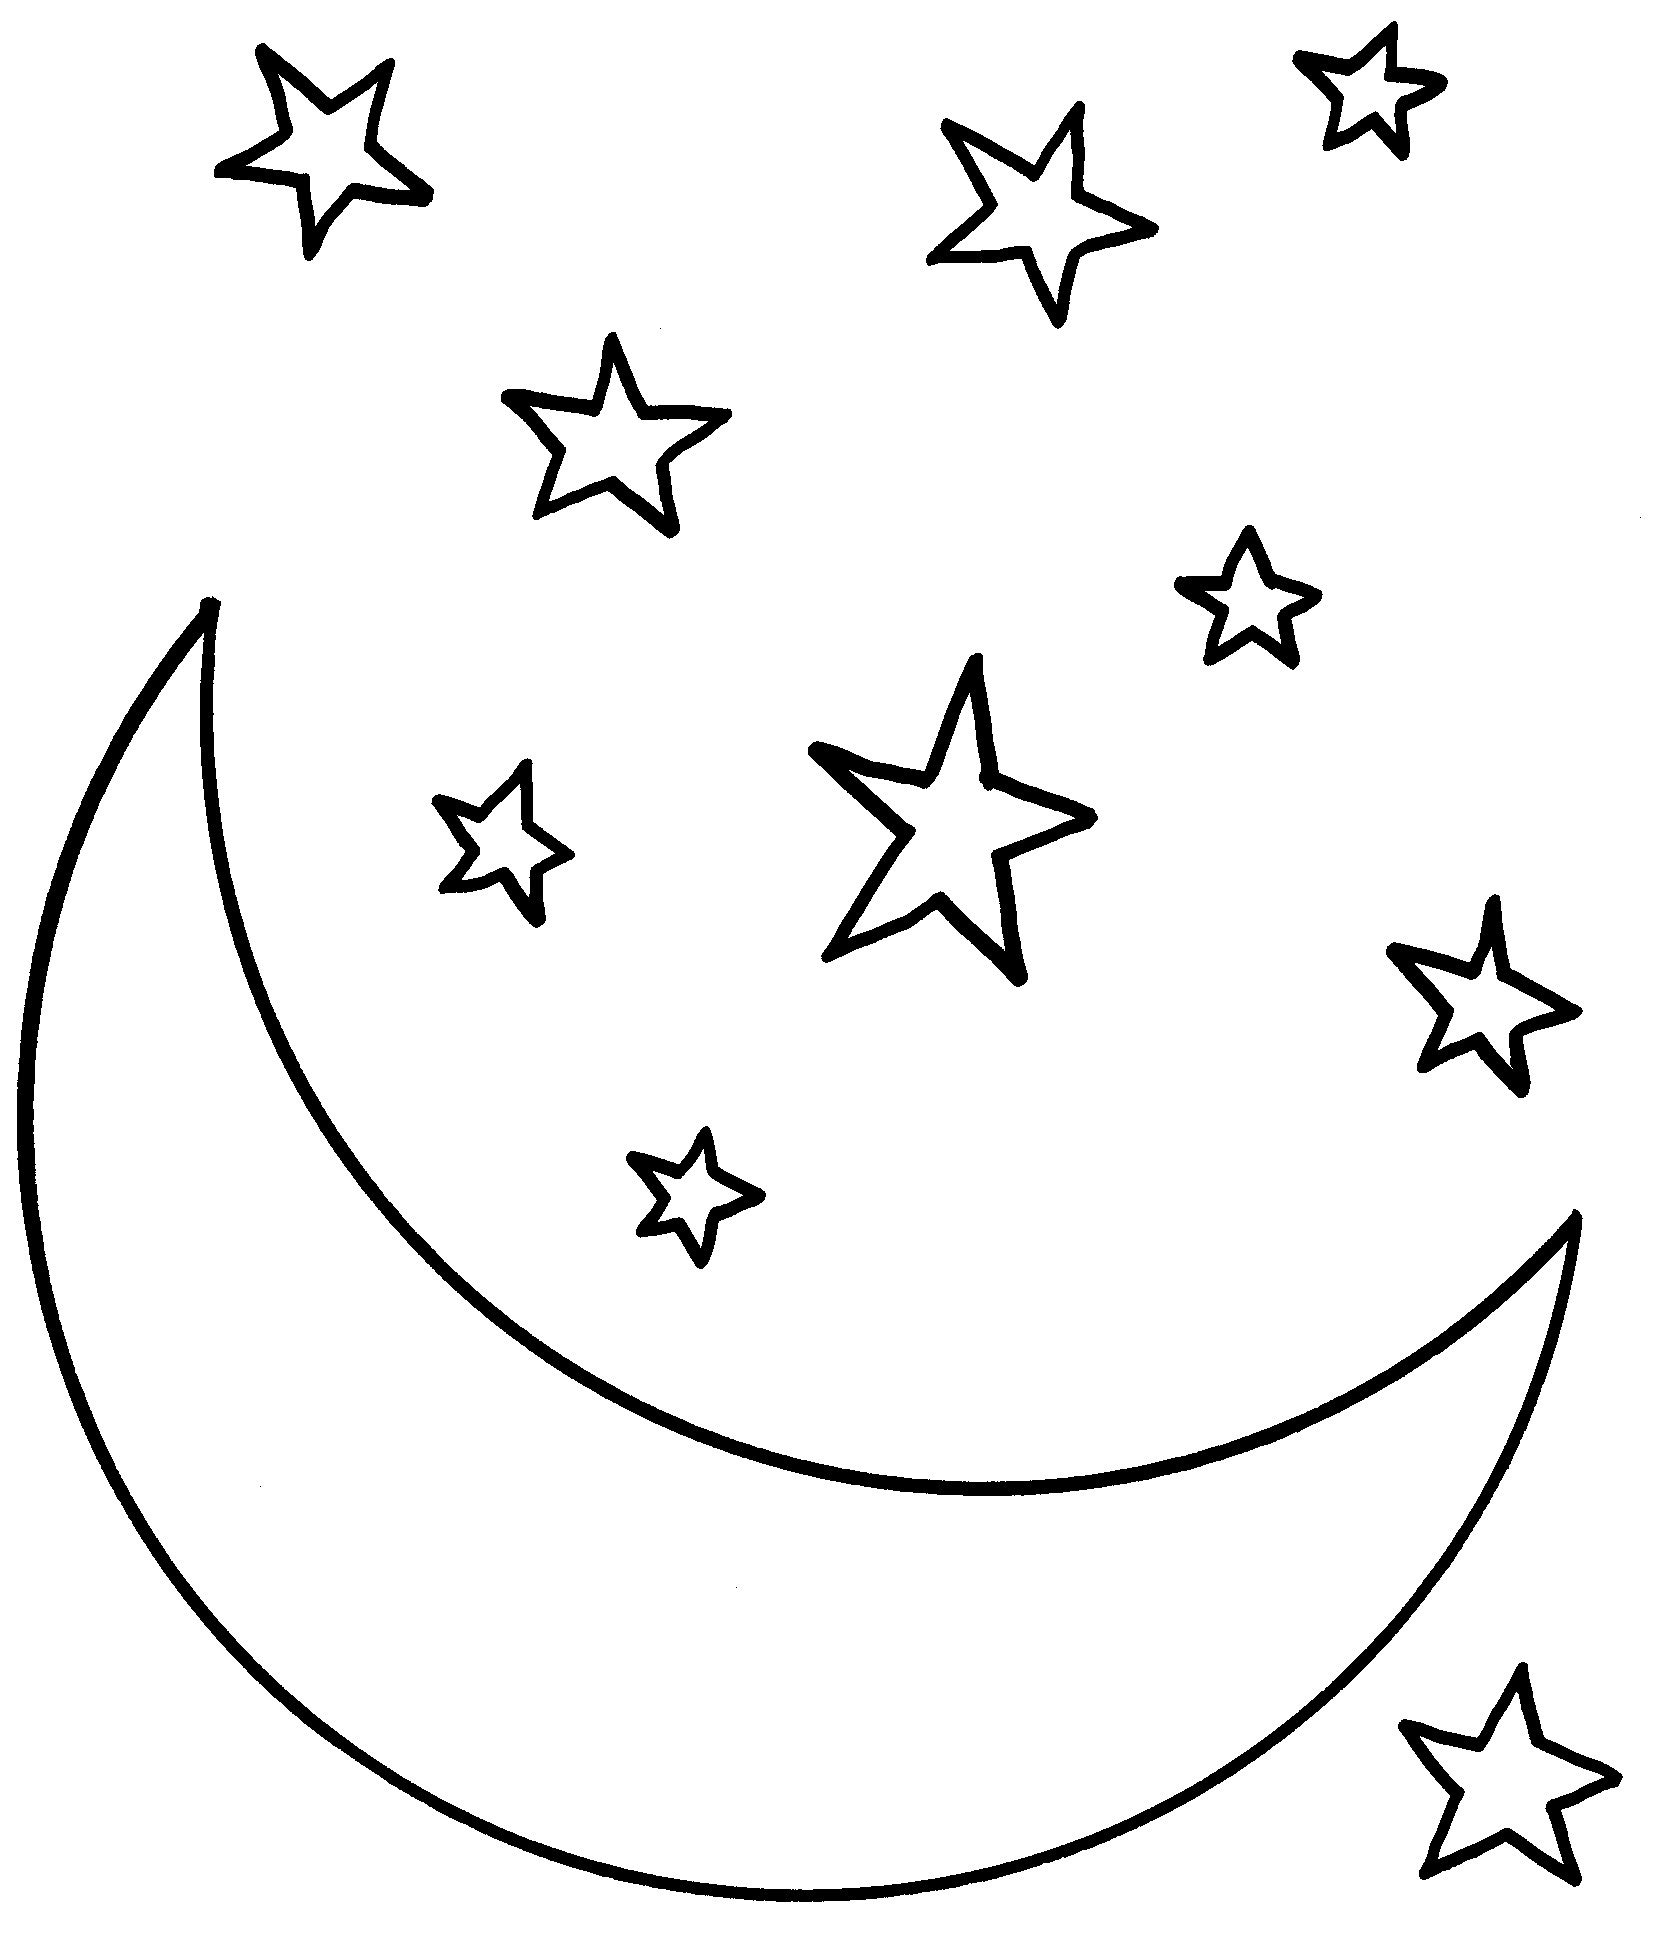 Coloring, Coloring pages and Shooting stars